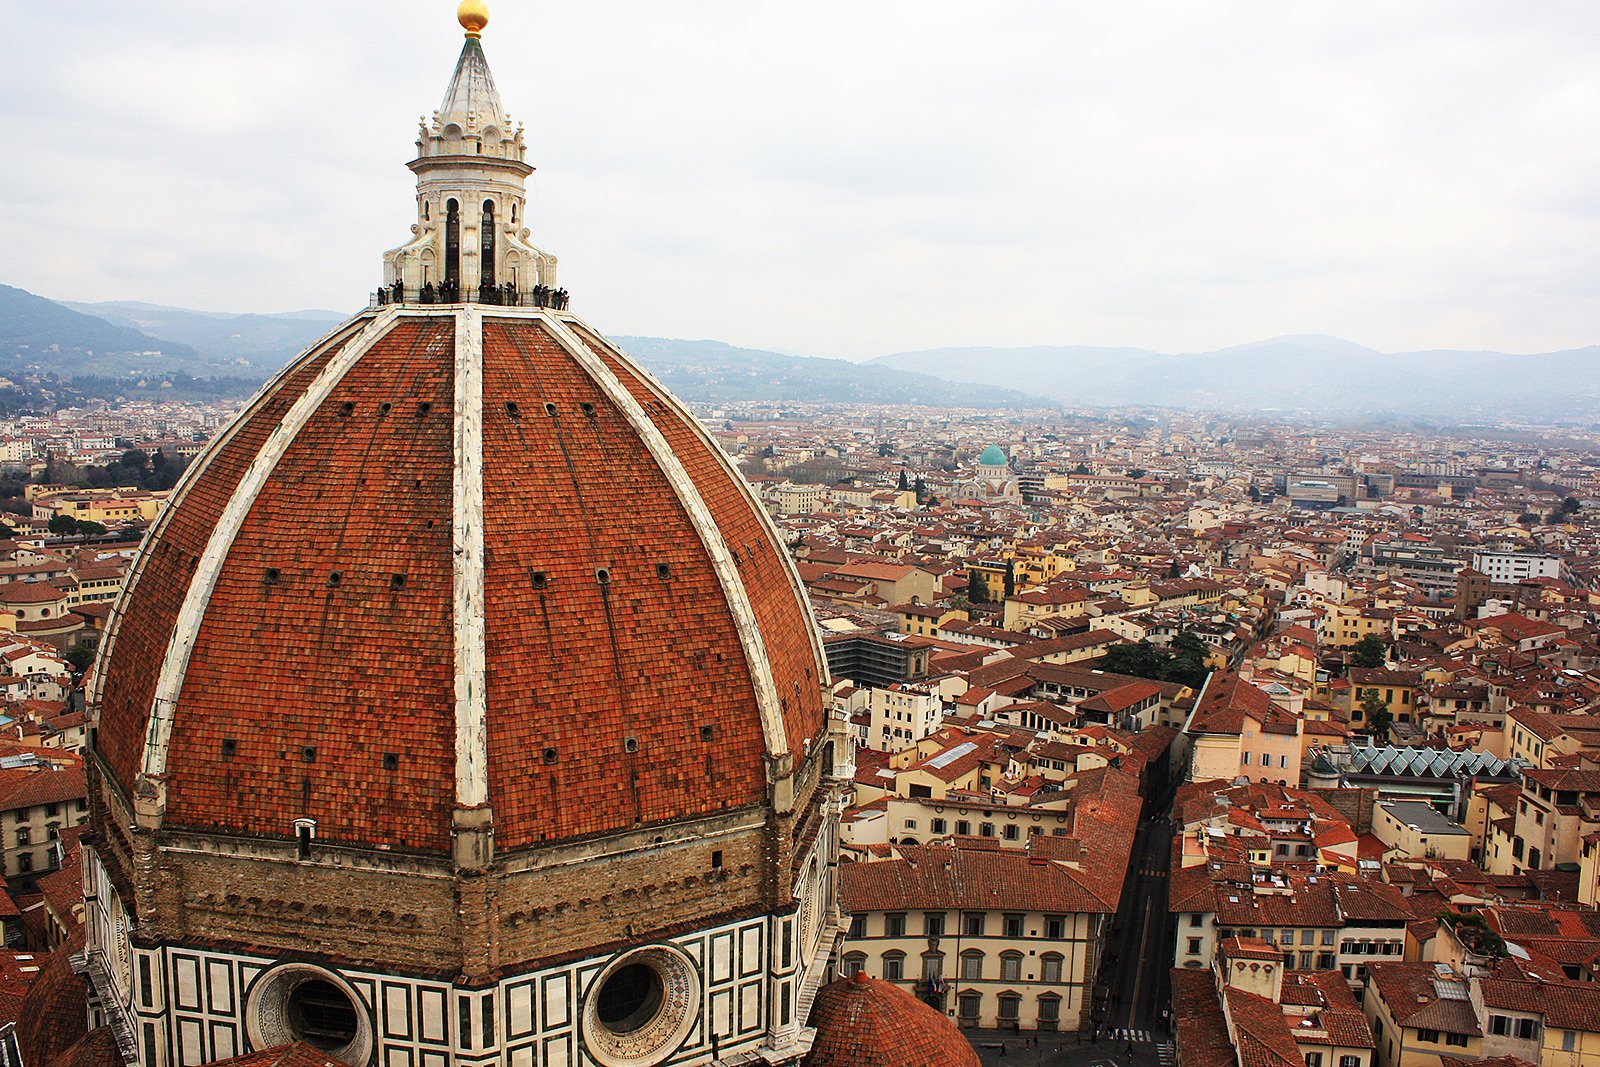 How to climb the Giotto's Bell Tower in Florence